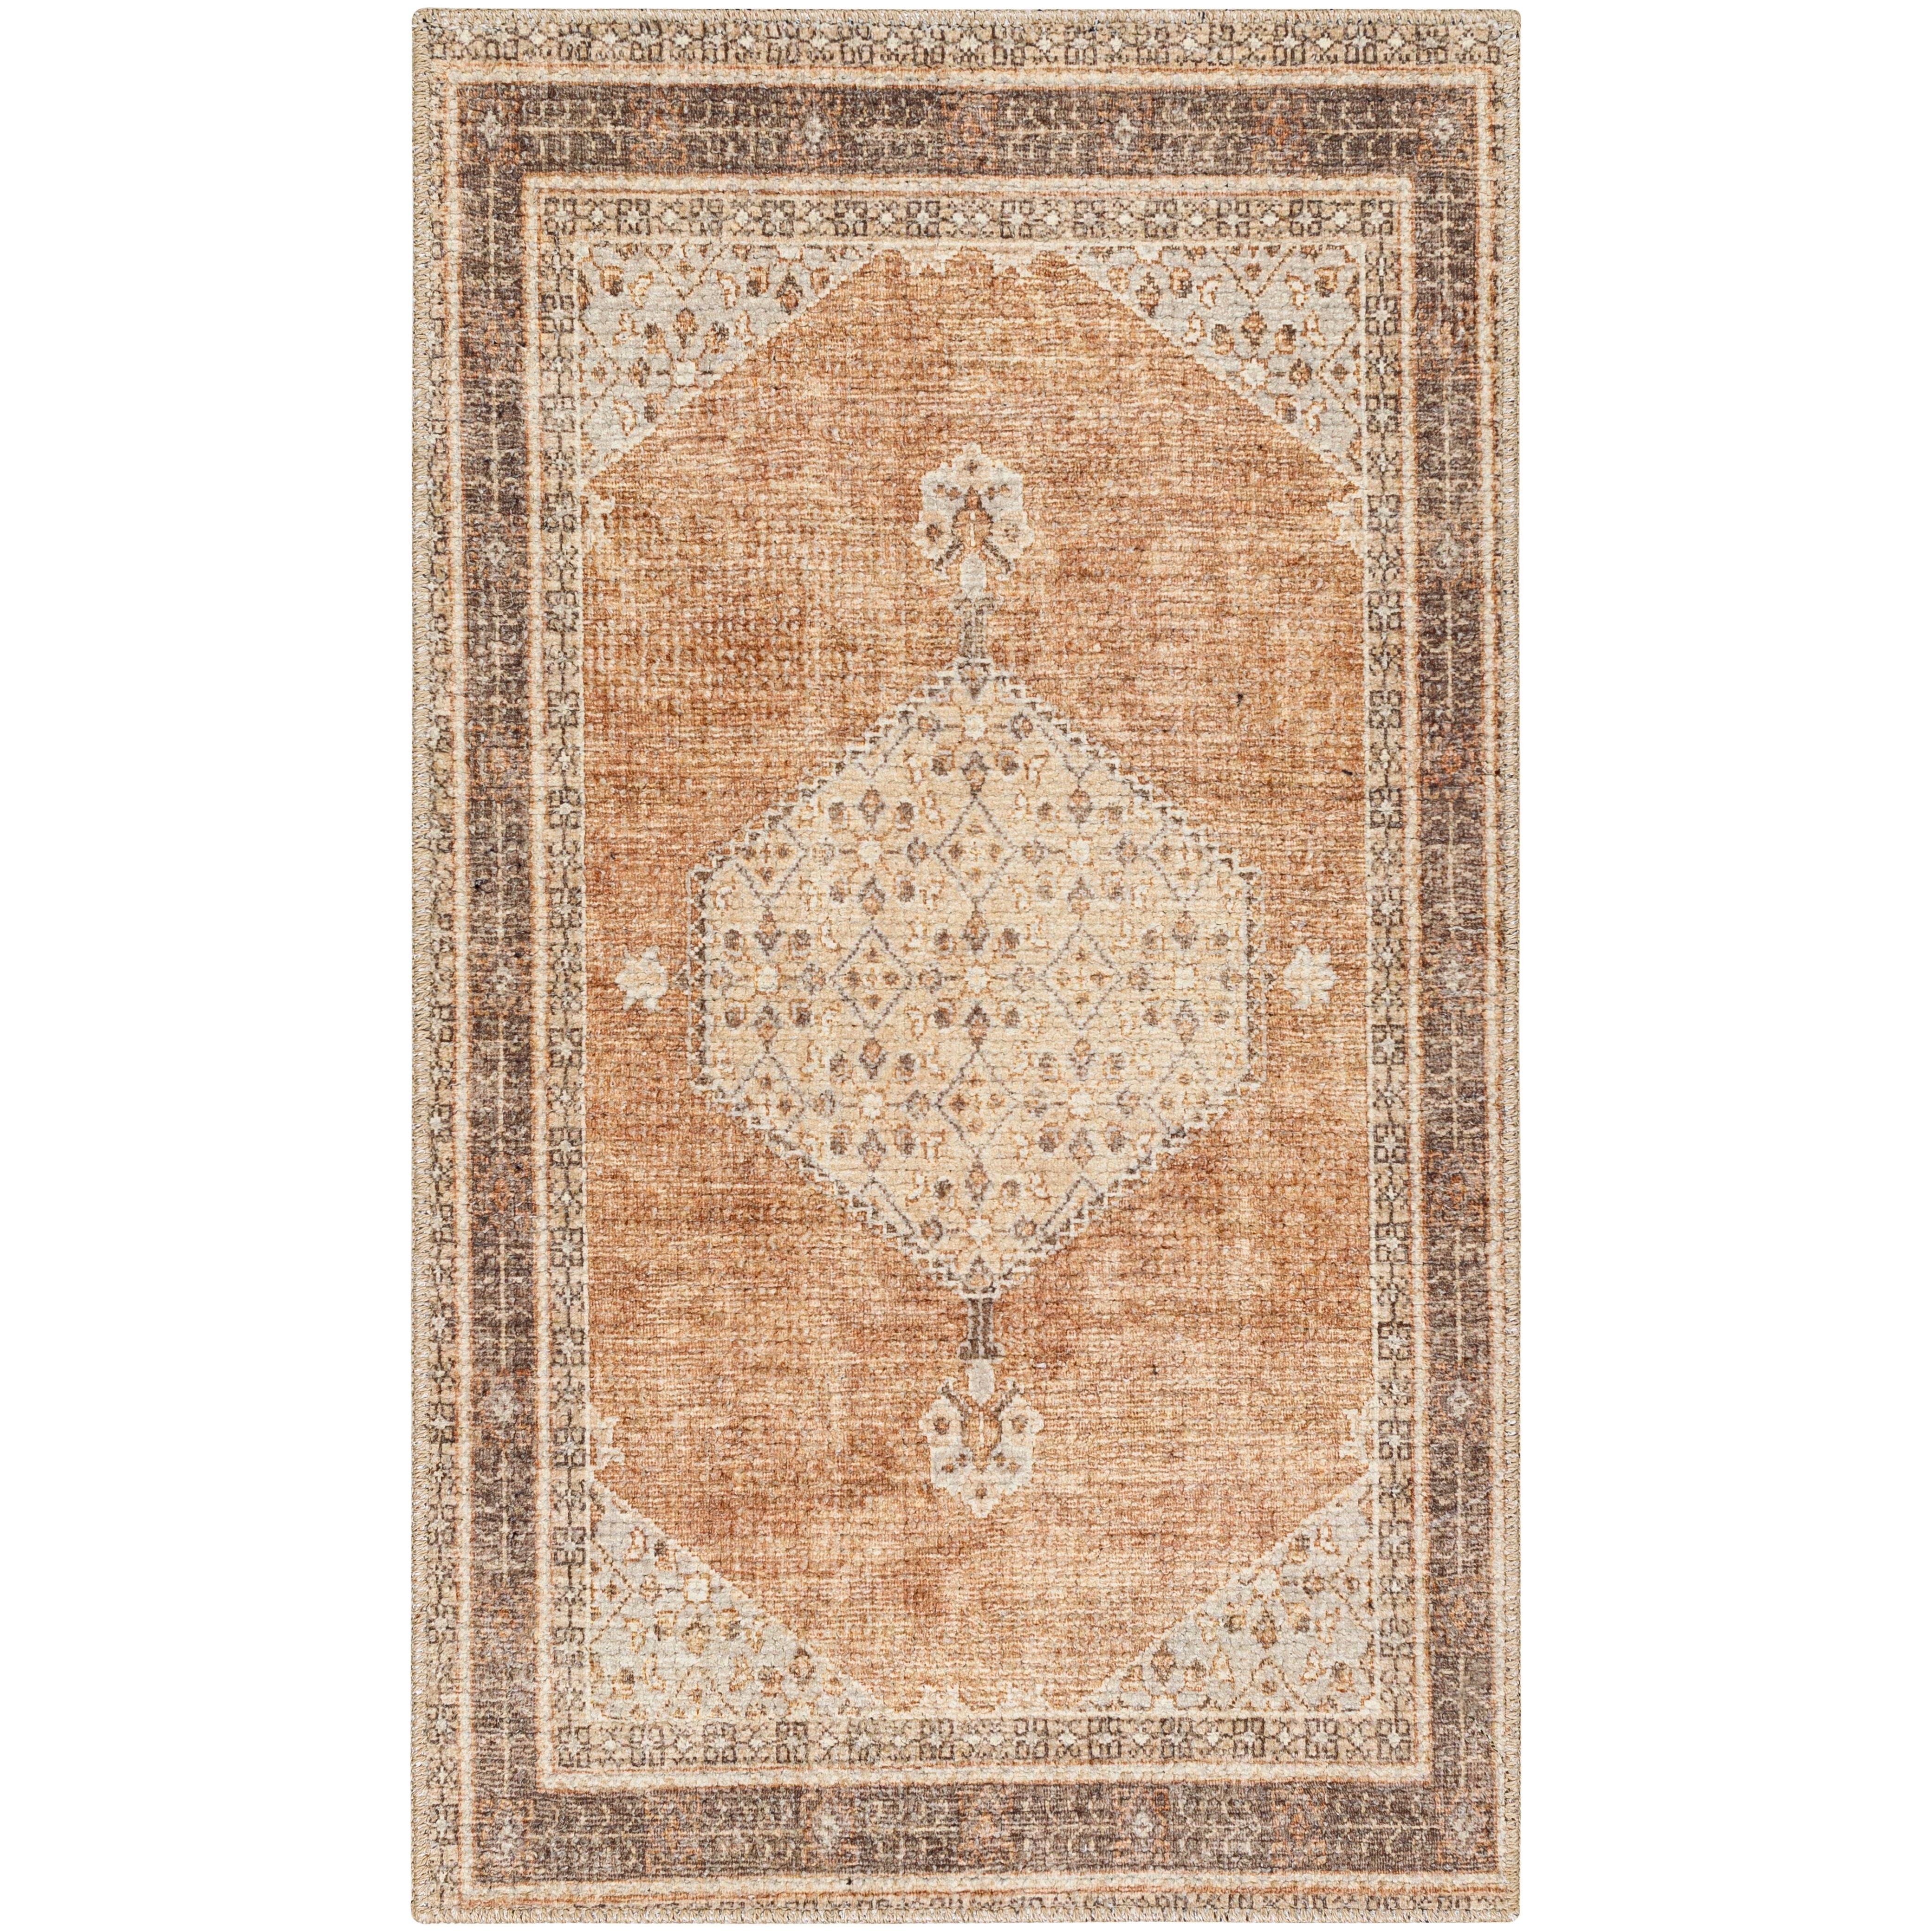 Brought to you by Becki Owens x Surya, the Lila Tan medallion area rug combines rich, detailed design with warm soft neutrals and tones to create an inviting space that will always feel familiar. Amethyst Home provides interior design, new construction, custom furniture, and area rugs in the Omaha metro area.